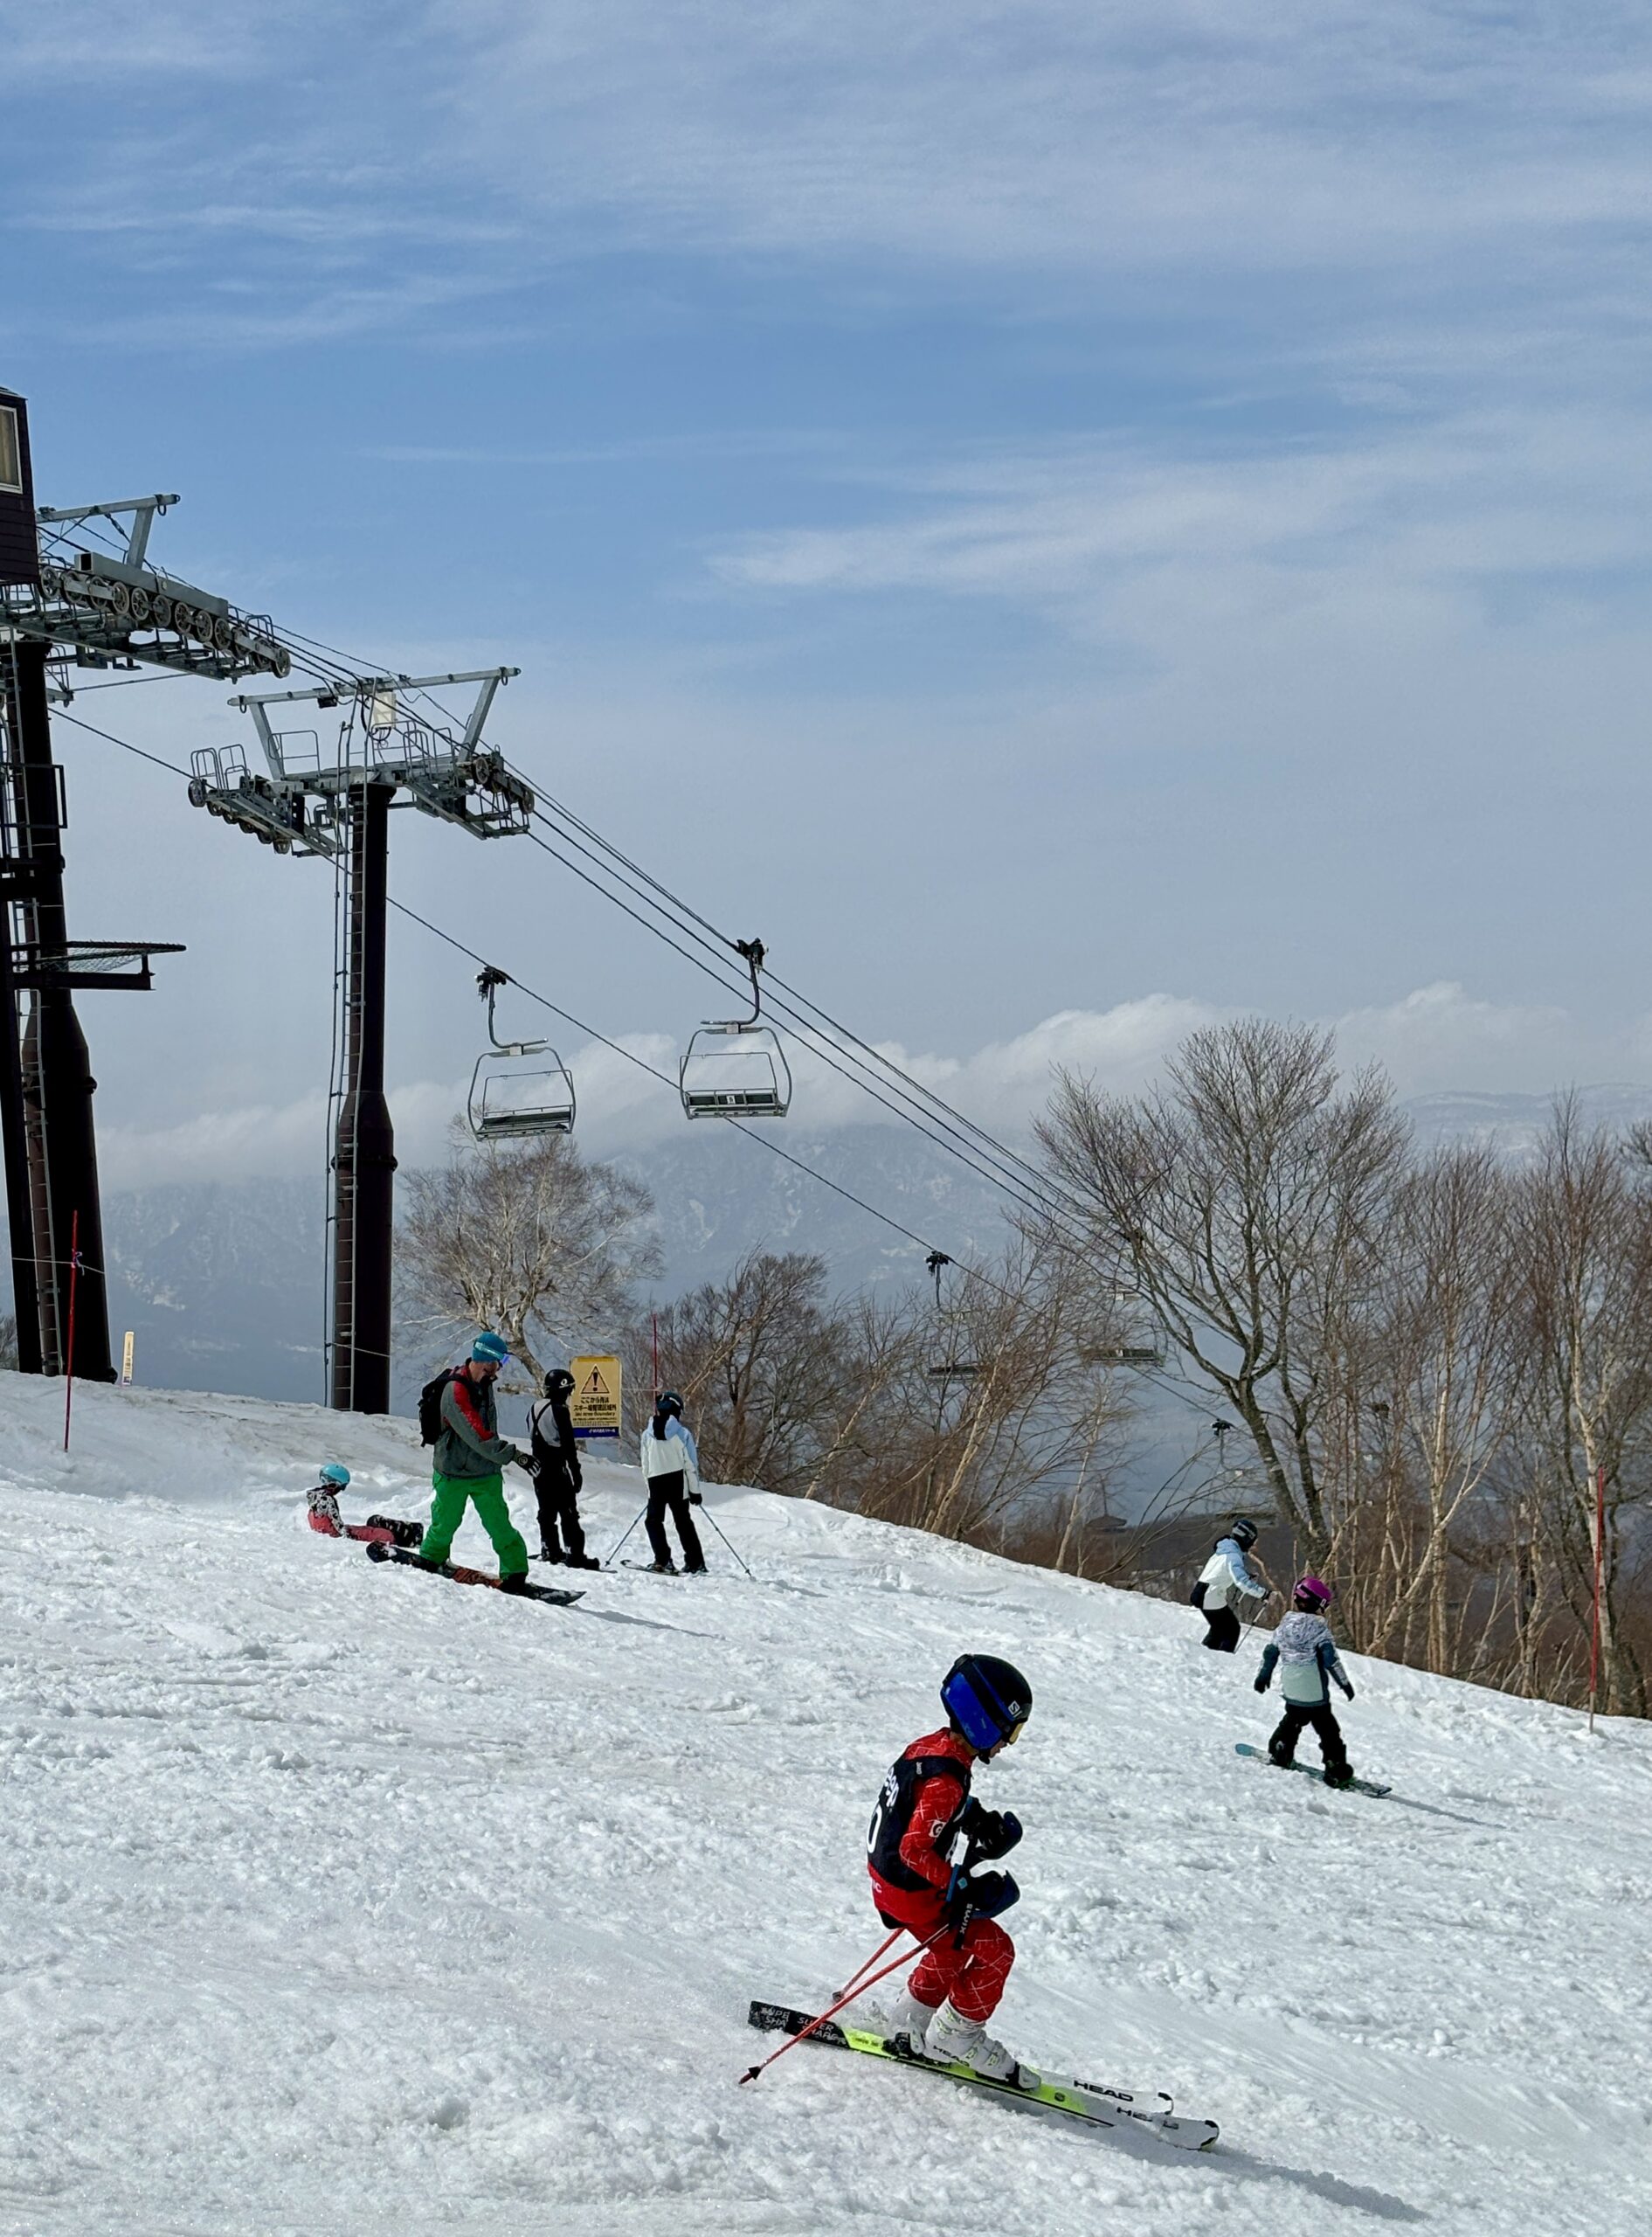 Winter season has ended but that doesn't stop anyone from skiing and snowboarding in Nozawa Onsen! 